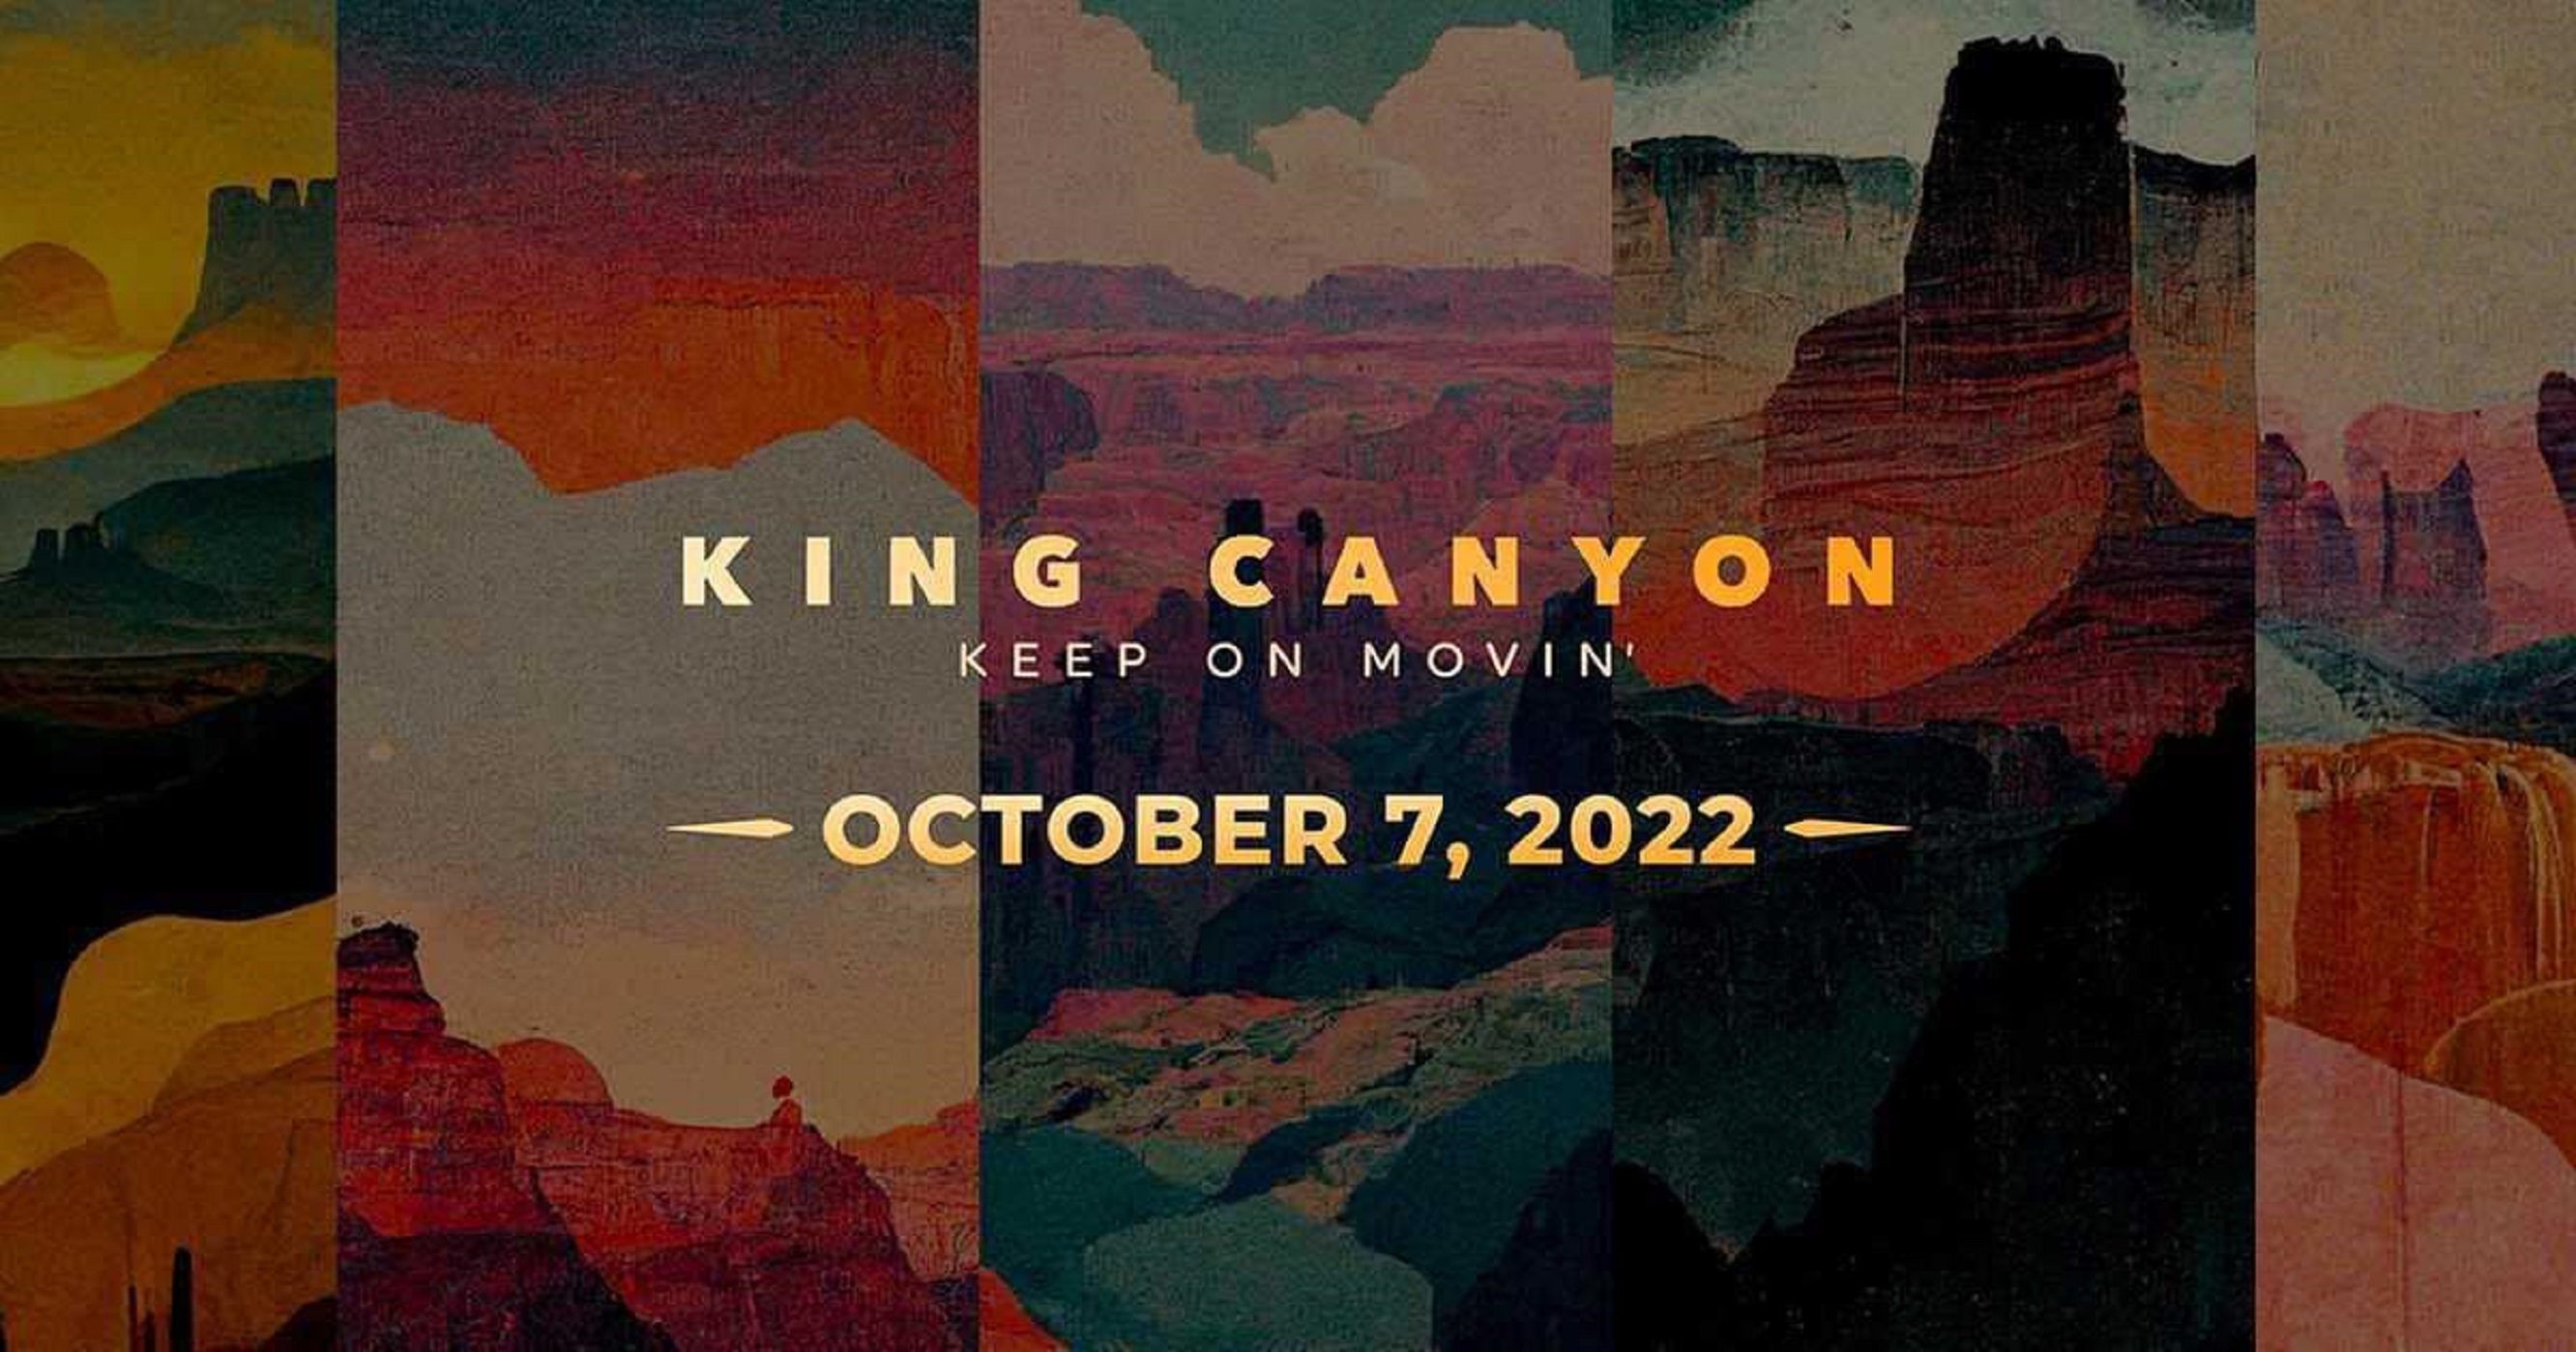 KING CANYON ANNOUNCE DEBUT SINGLE “KEEP ON MOVIN”